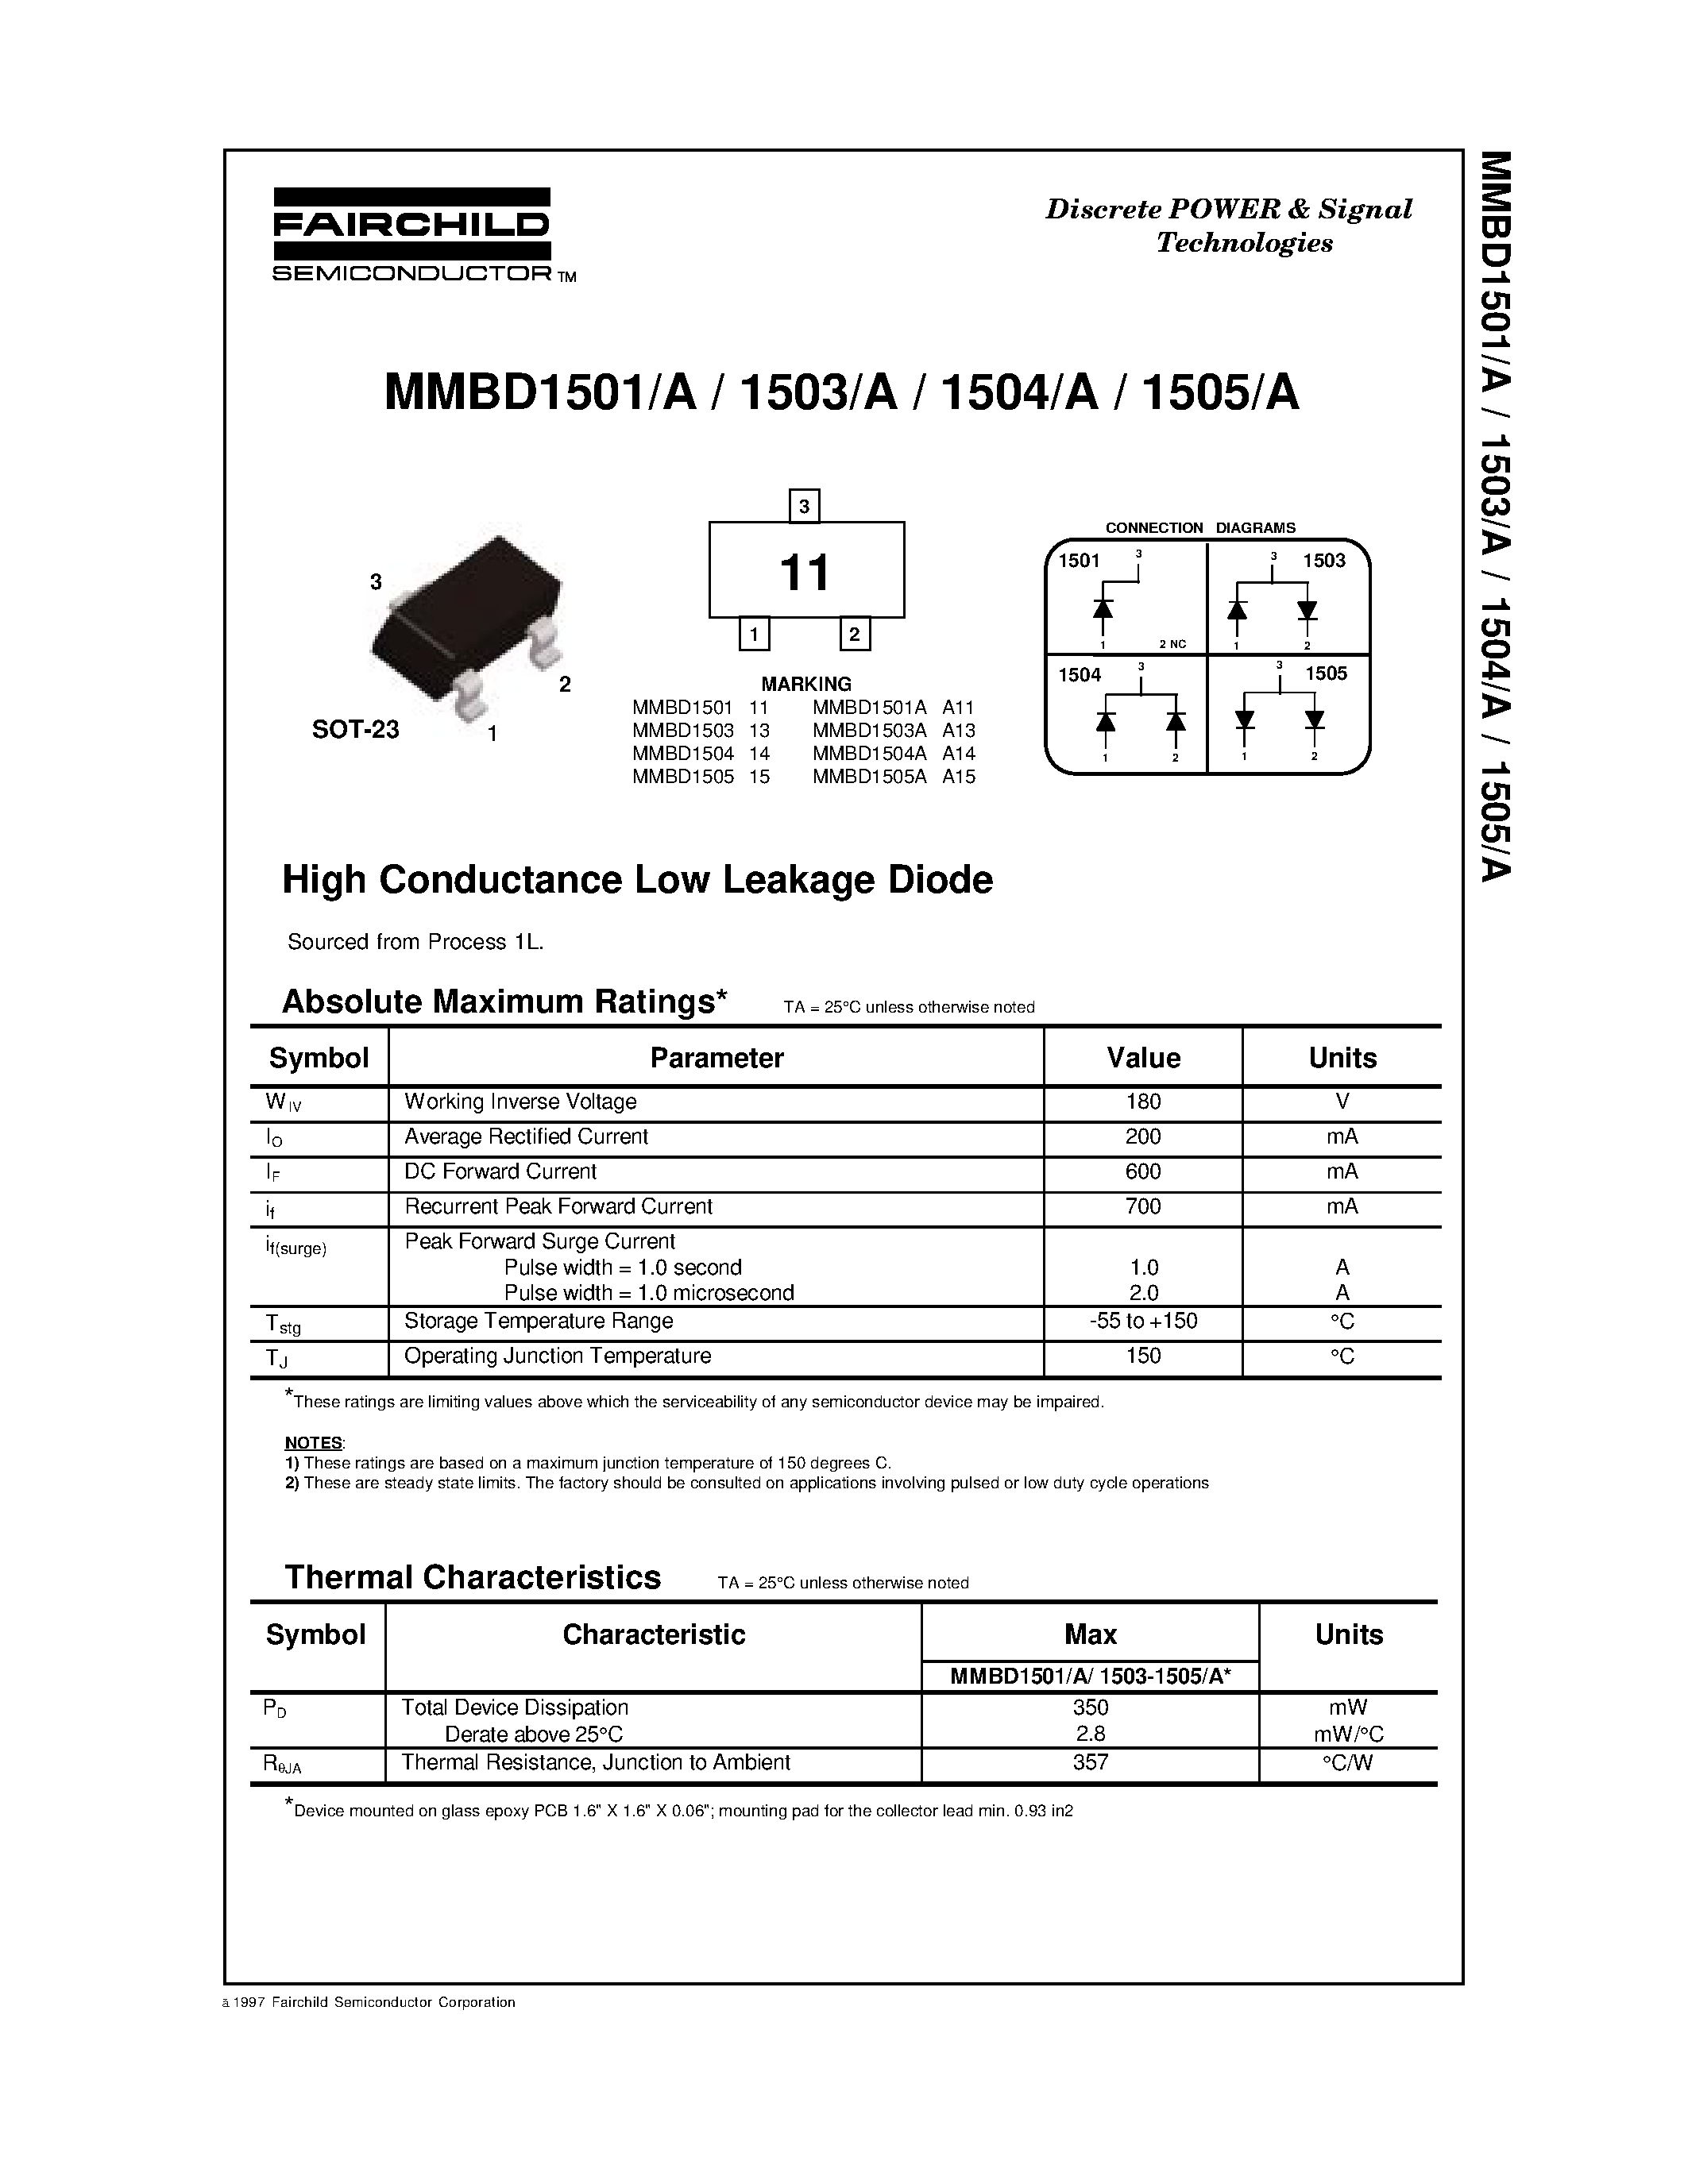 Даташит MMBD1504 - High Conductance Low Leakage Diode страница 1